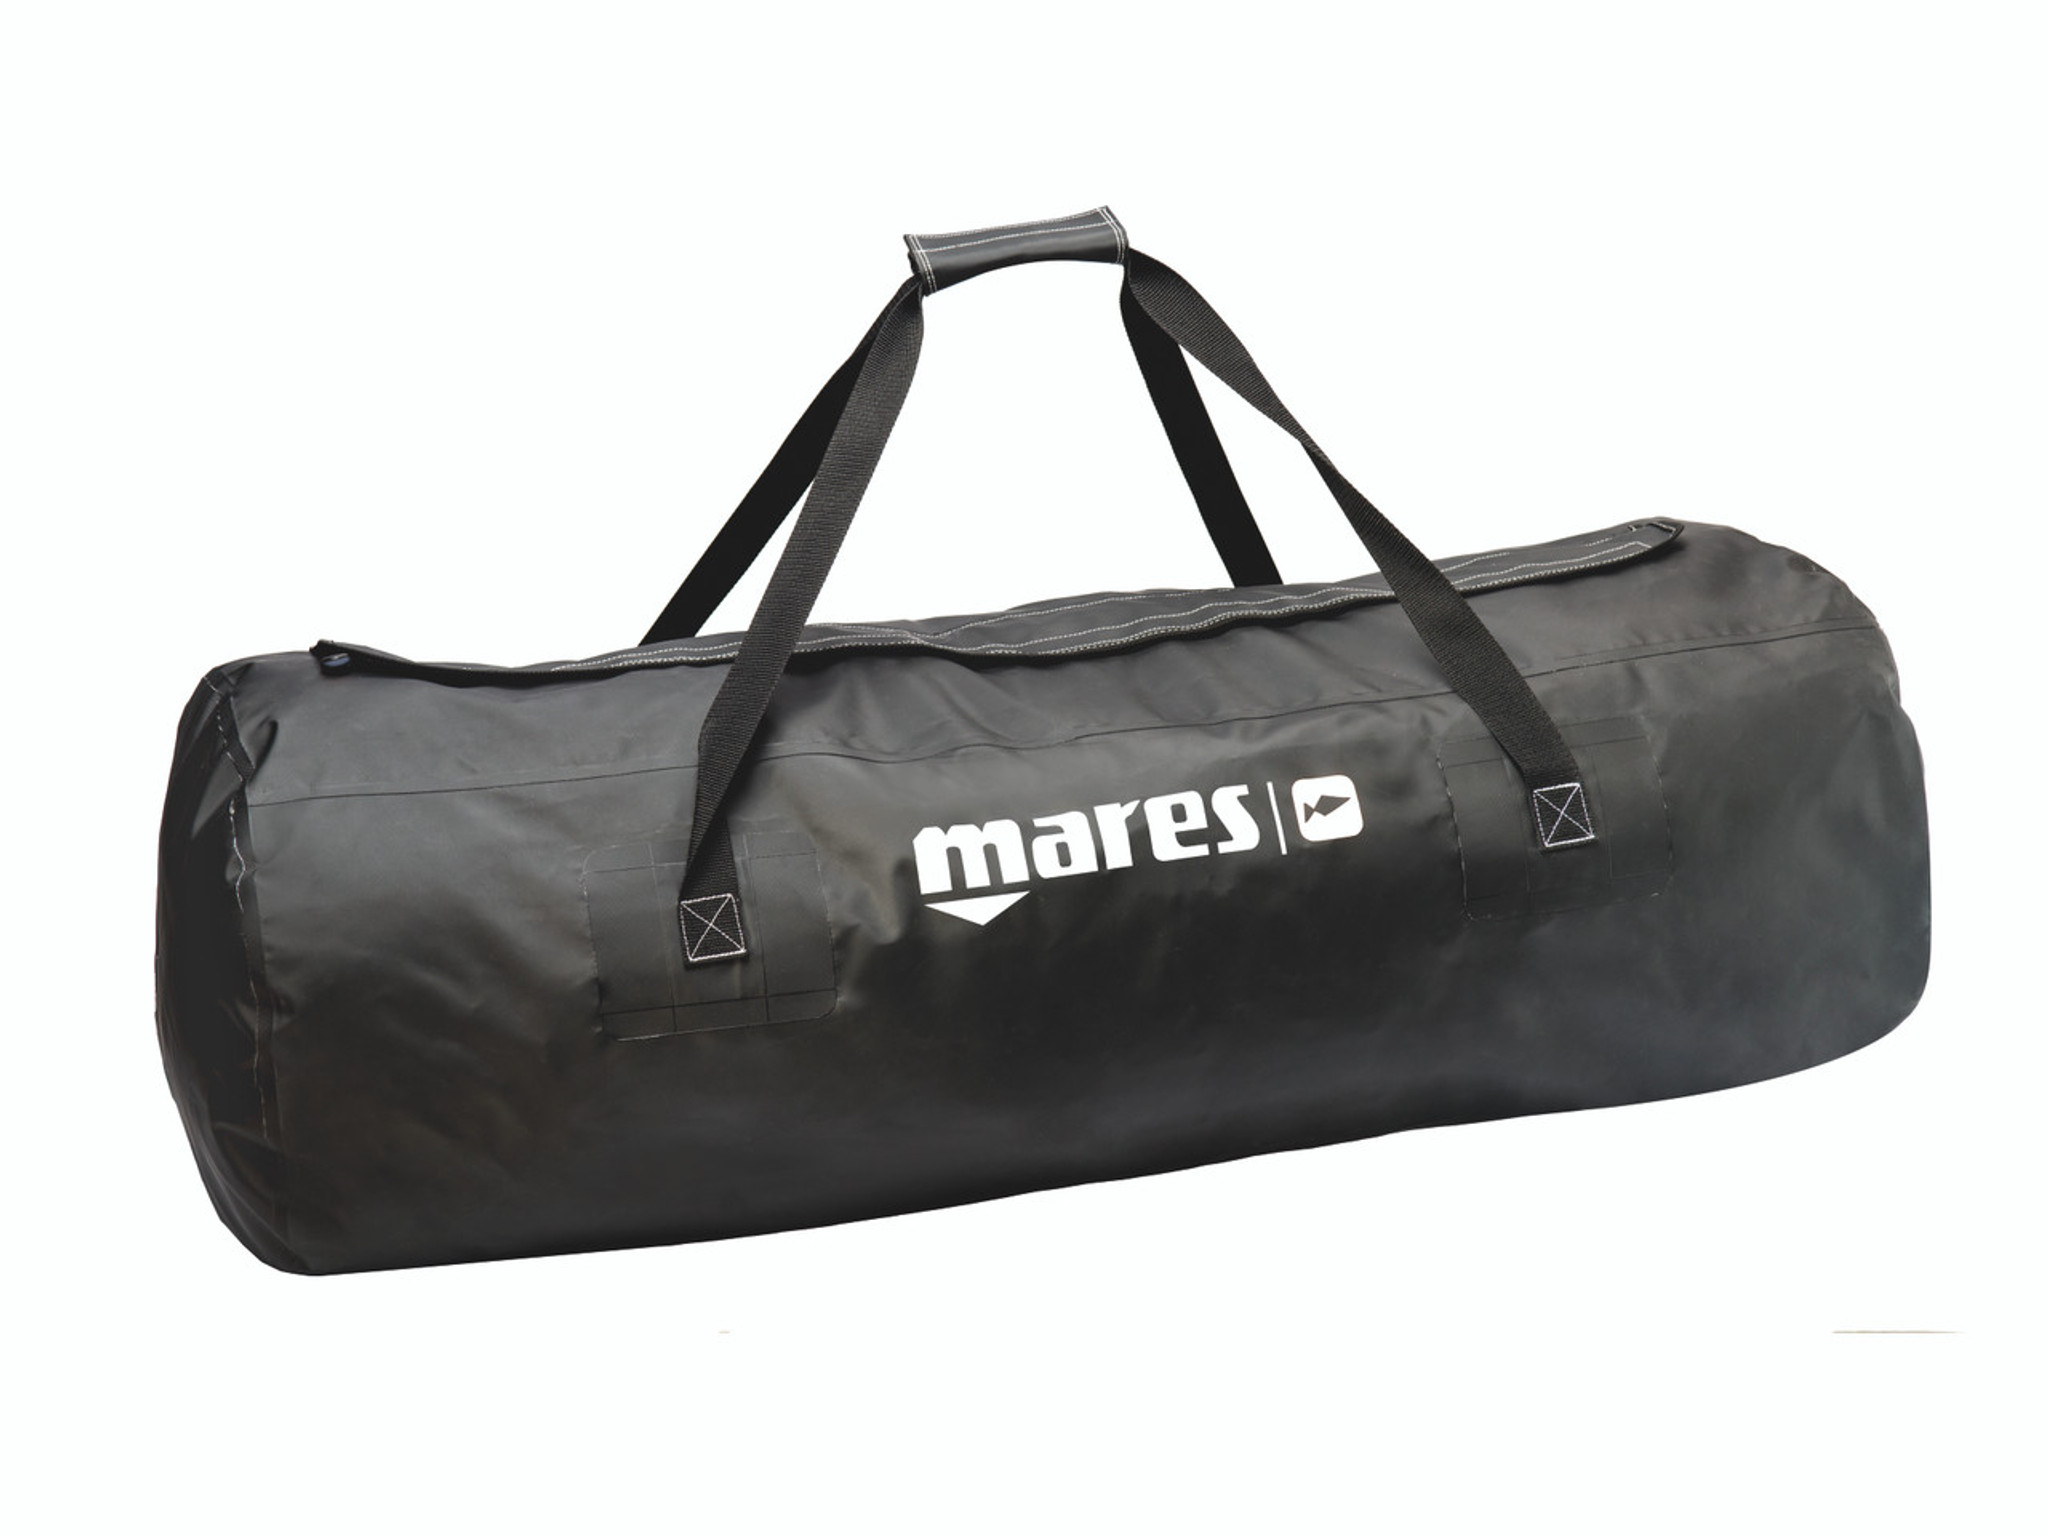 Mares Attack 100 Bag Duffle Gear Spearfishing Bag 425560 - Coral